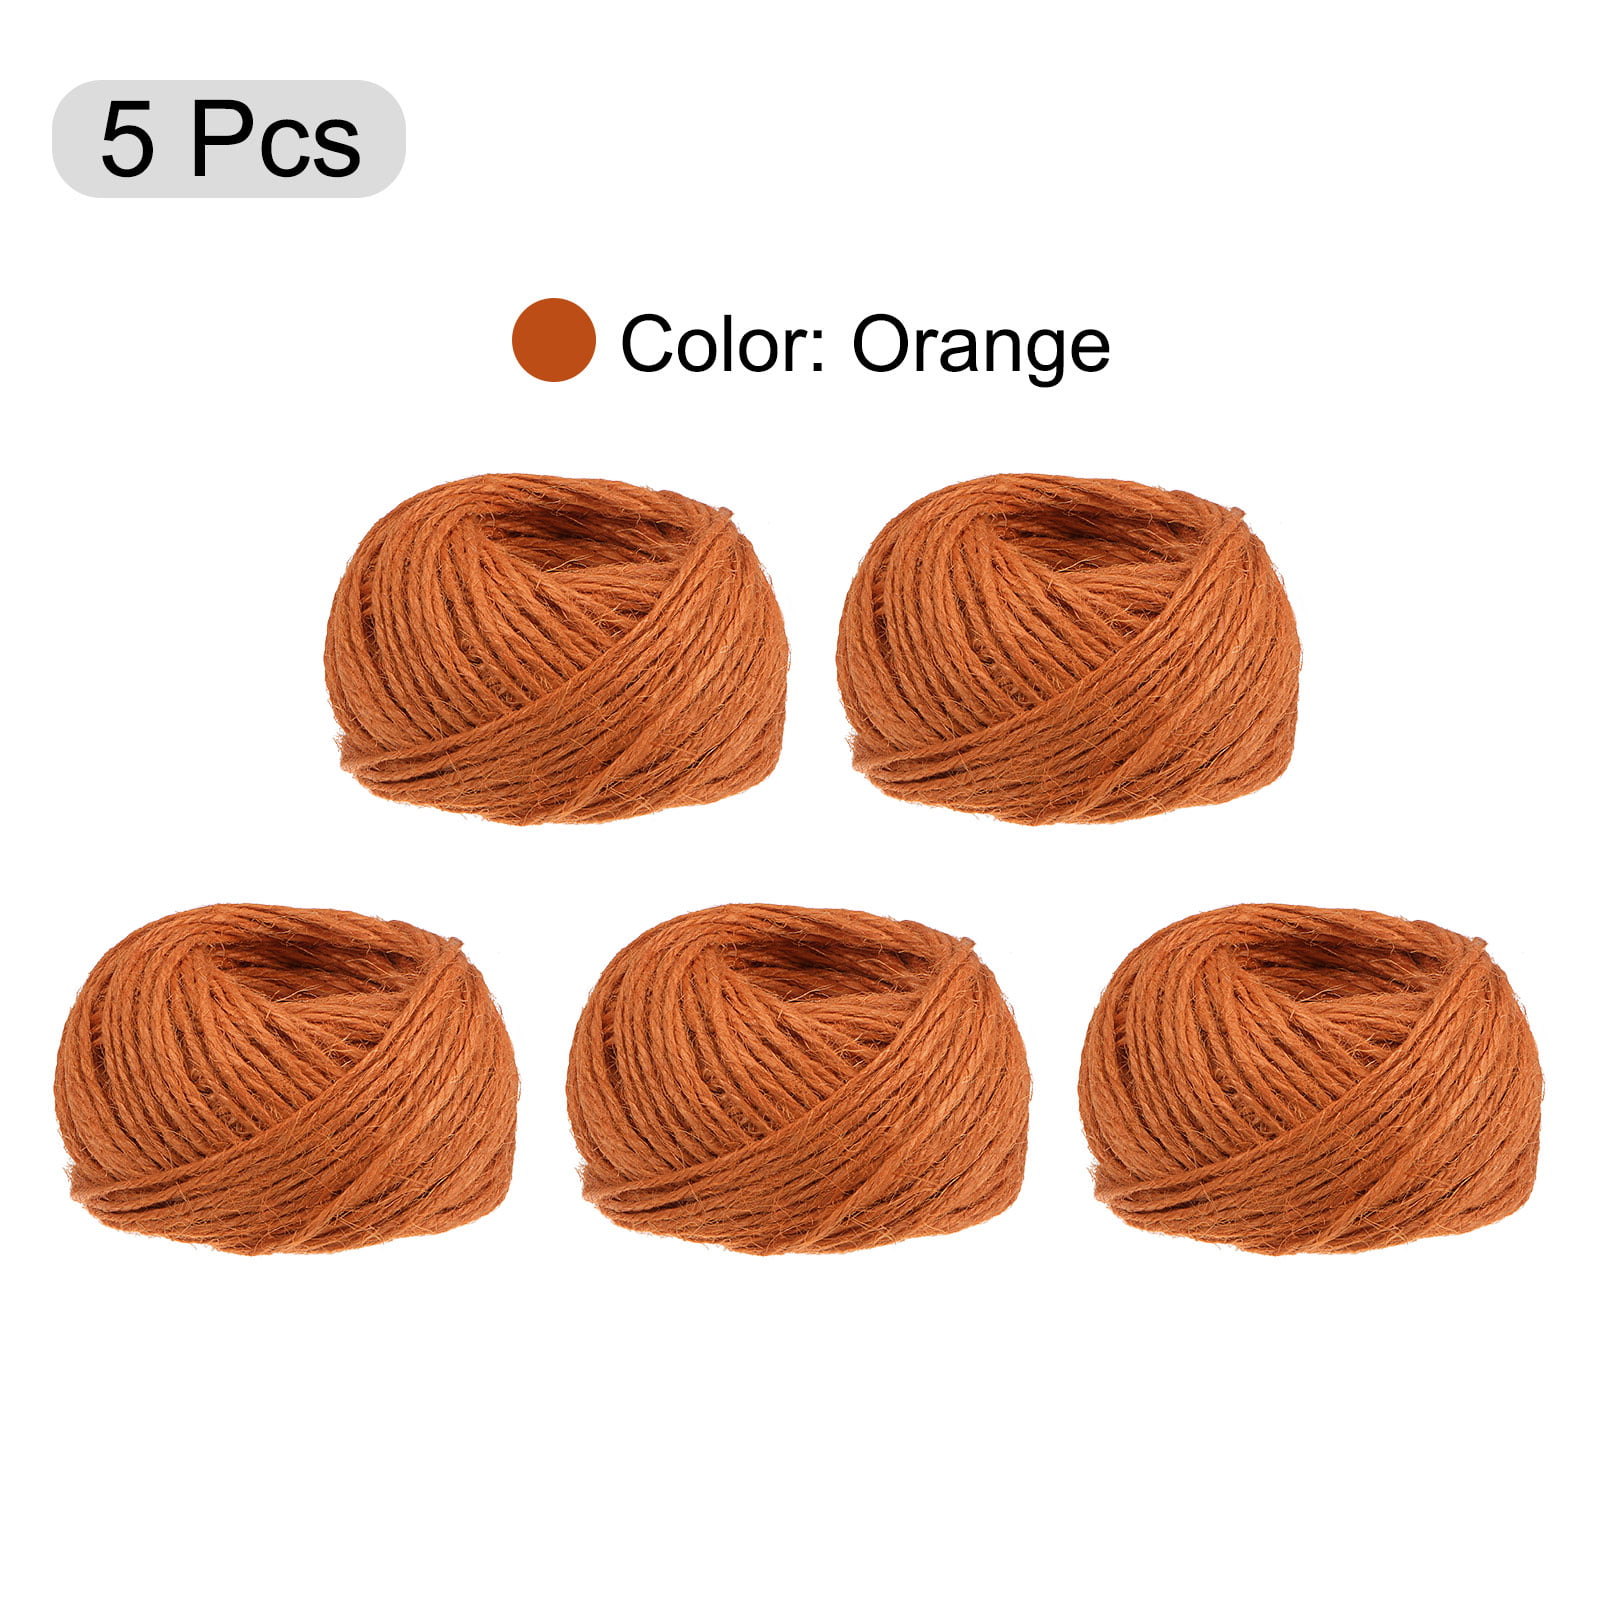 82ft Jute Twine 0.04inch 3 Ply Natural String for DIY Crafts, 5Pcs